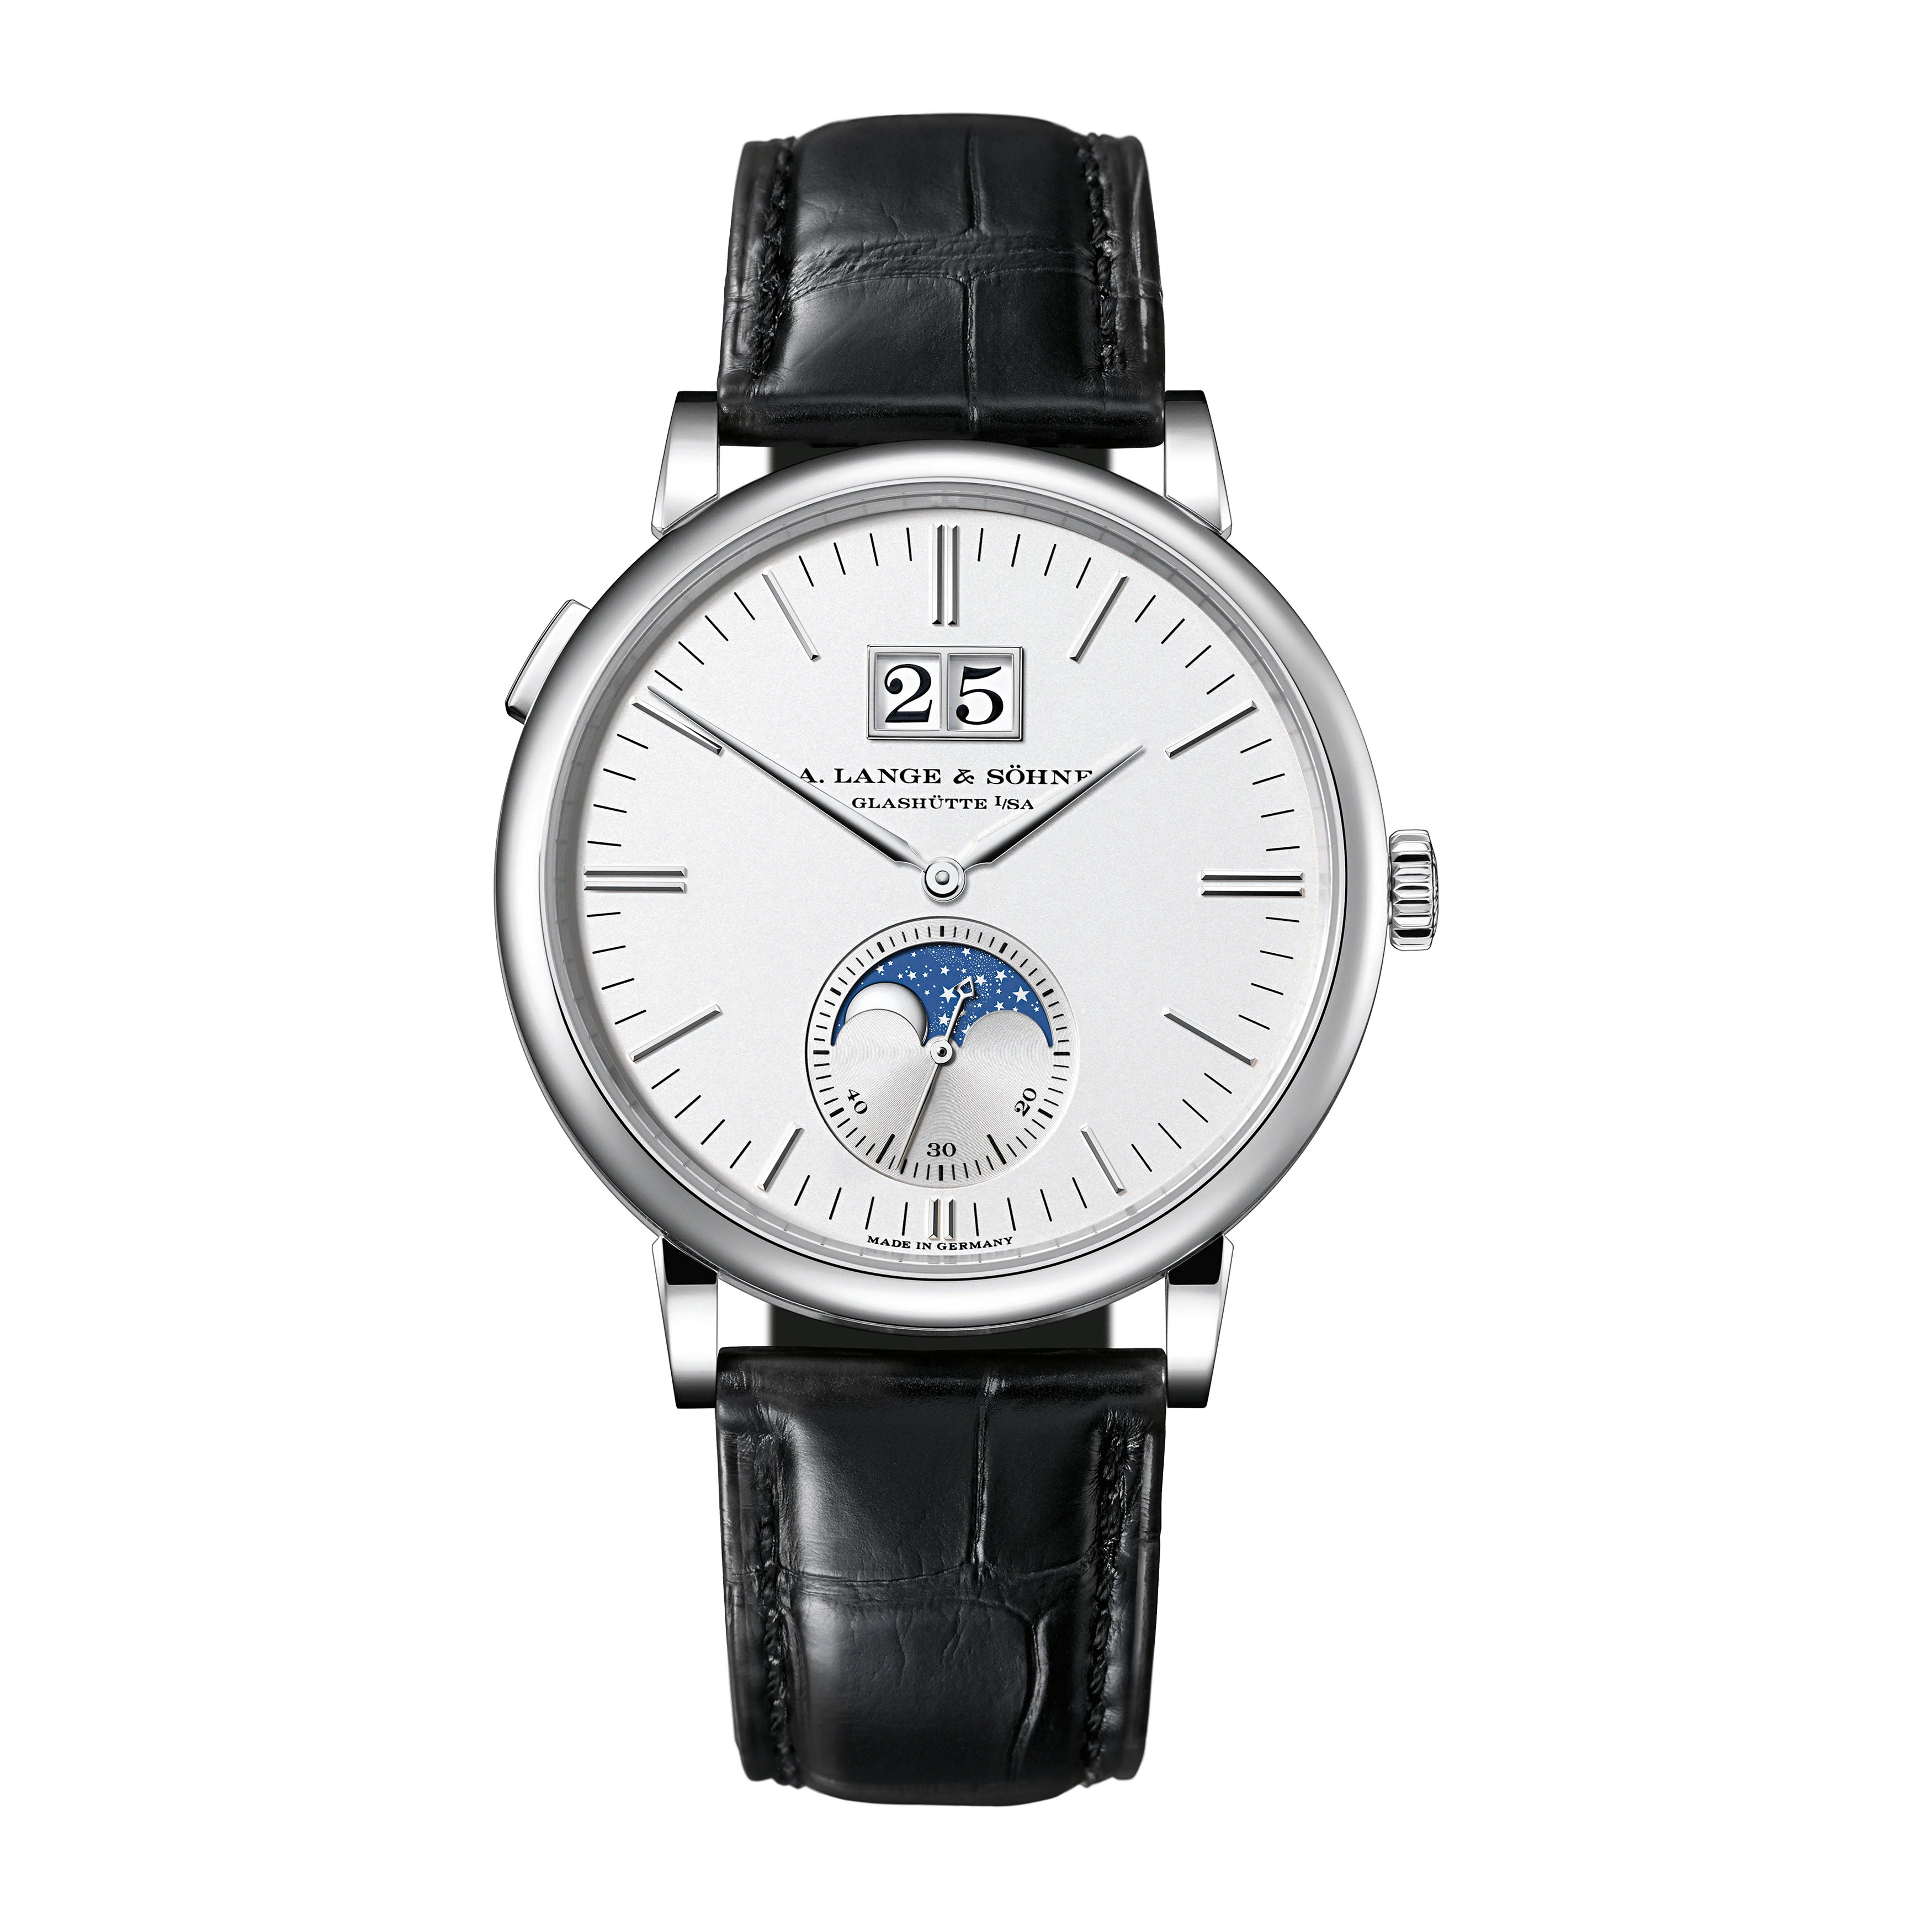 A.Lange & Sohne Saxonia Moon Phase Watch, 40mm Silver Dial, 384.026